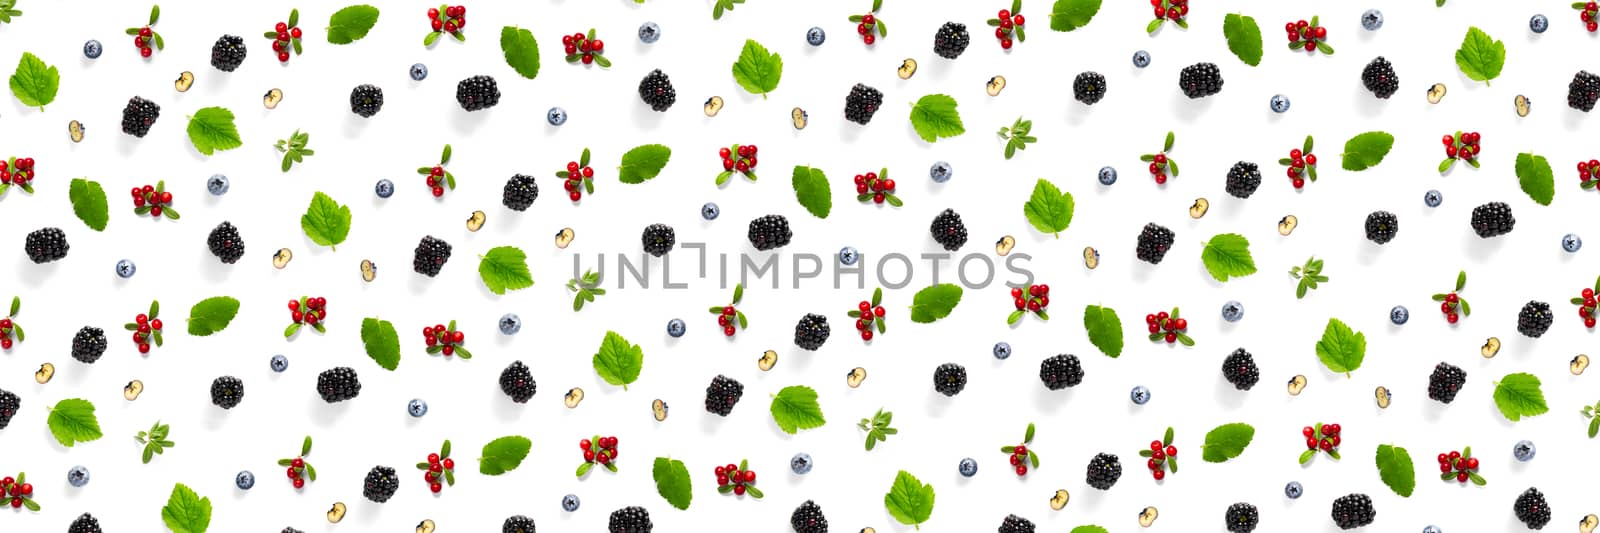 Set of wild berries, blackberry, blueberry, lingonberry and bramble.banner Background on white backdrop made from autumn forest wild berries. by PhotoTime